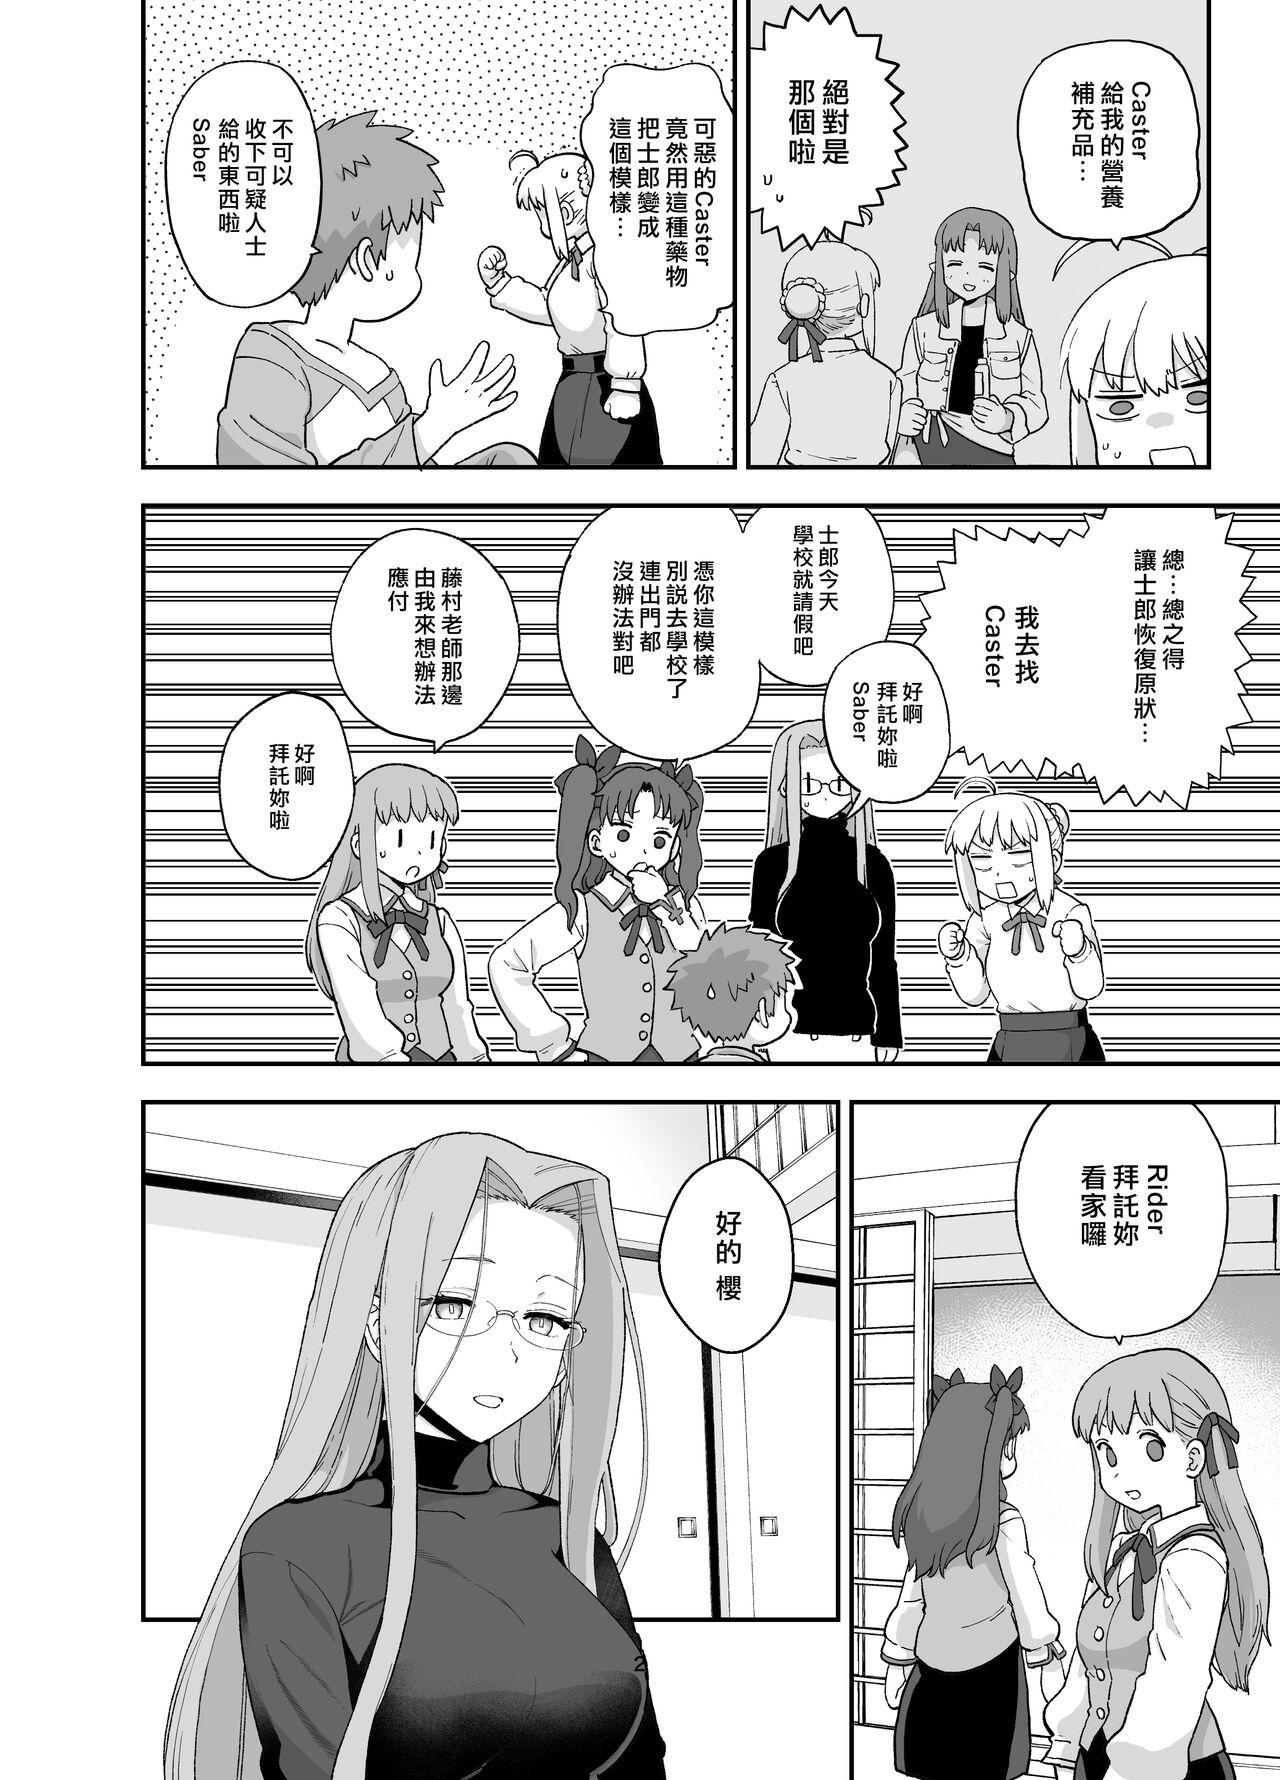 Dorm Rider-san to Orusuban - Fate stay night Hot Naked Girl - Page 5